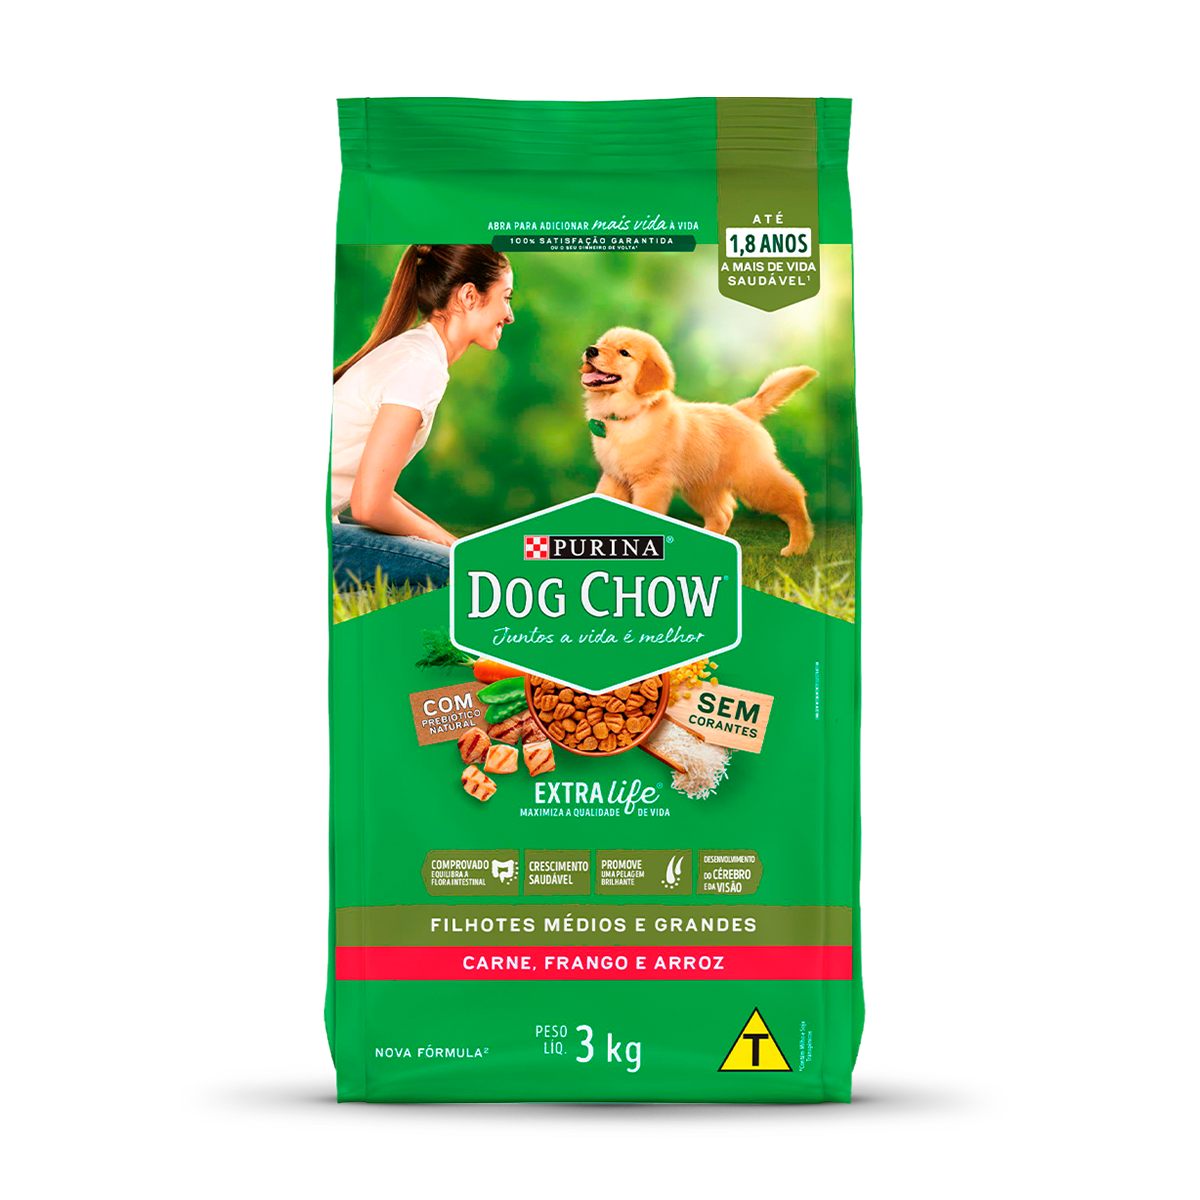 purina-dog-chow-filthoes-grandes.png